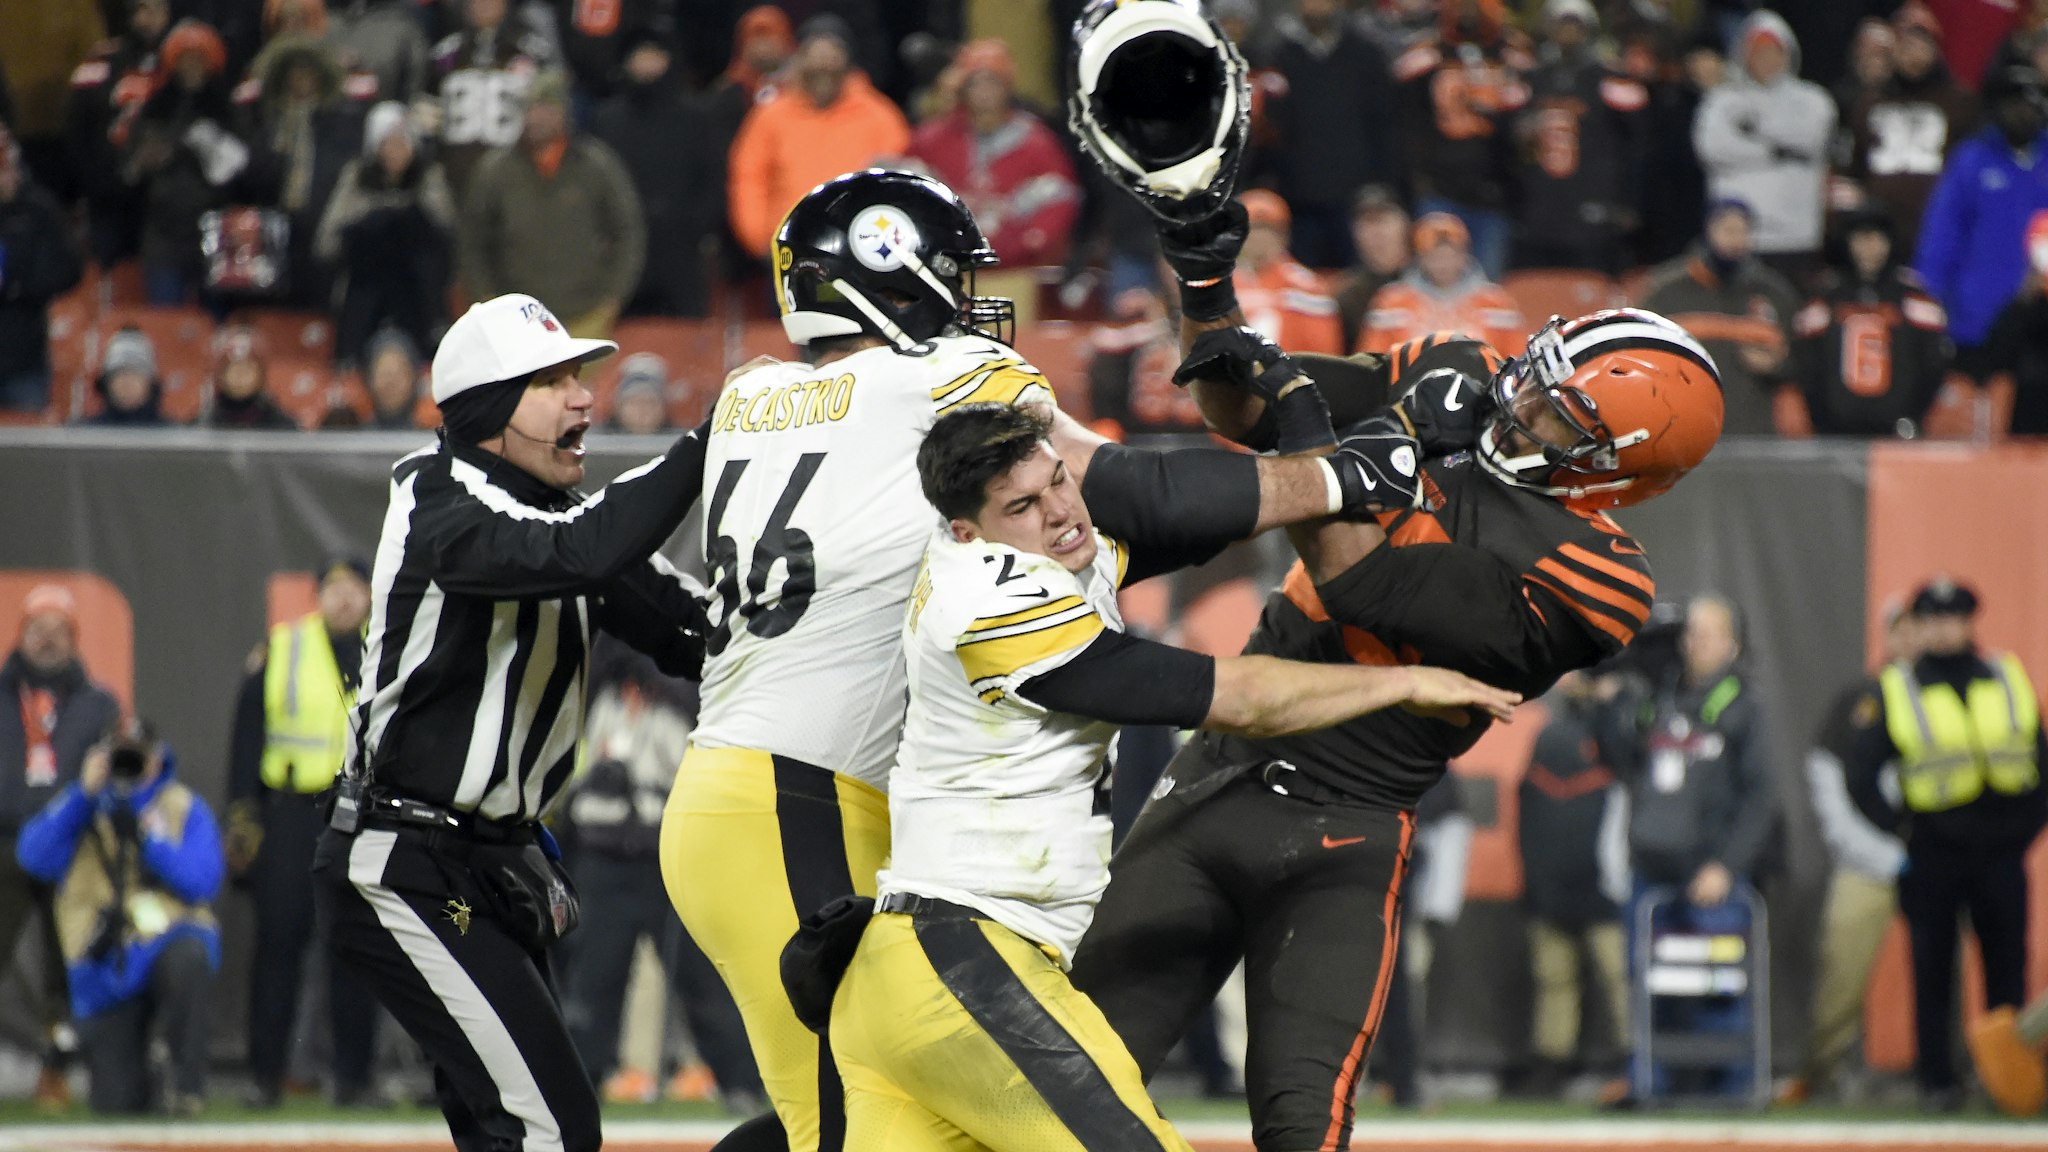 CLEVELAND, OHIO - NOVEMBER 14: Quarterback Mason Rudolph #2 of the Pittsburgh Steelers fights with defensive end Myles Garrett #95 of the Cleveland Browns during the second half at FirstEnergy Stadium on November 14, 2019 in Cleveland, Ohio. The Browns defeated the Steelers 21-7.